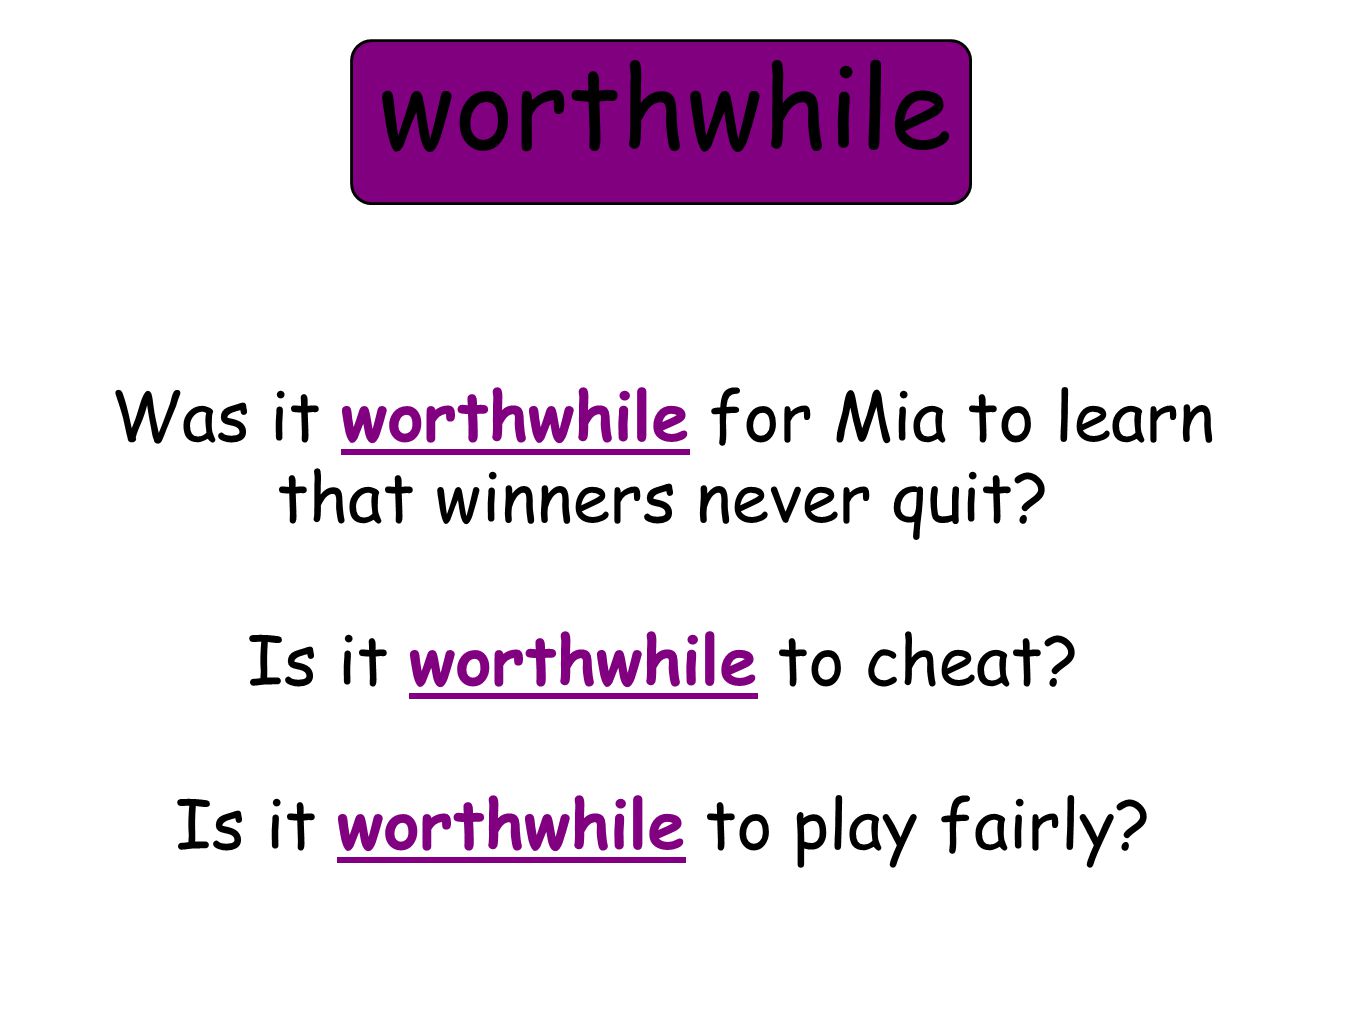 Was it worthwhile for Mia to learn that winners never quit.